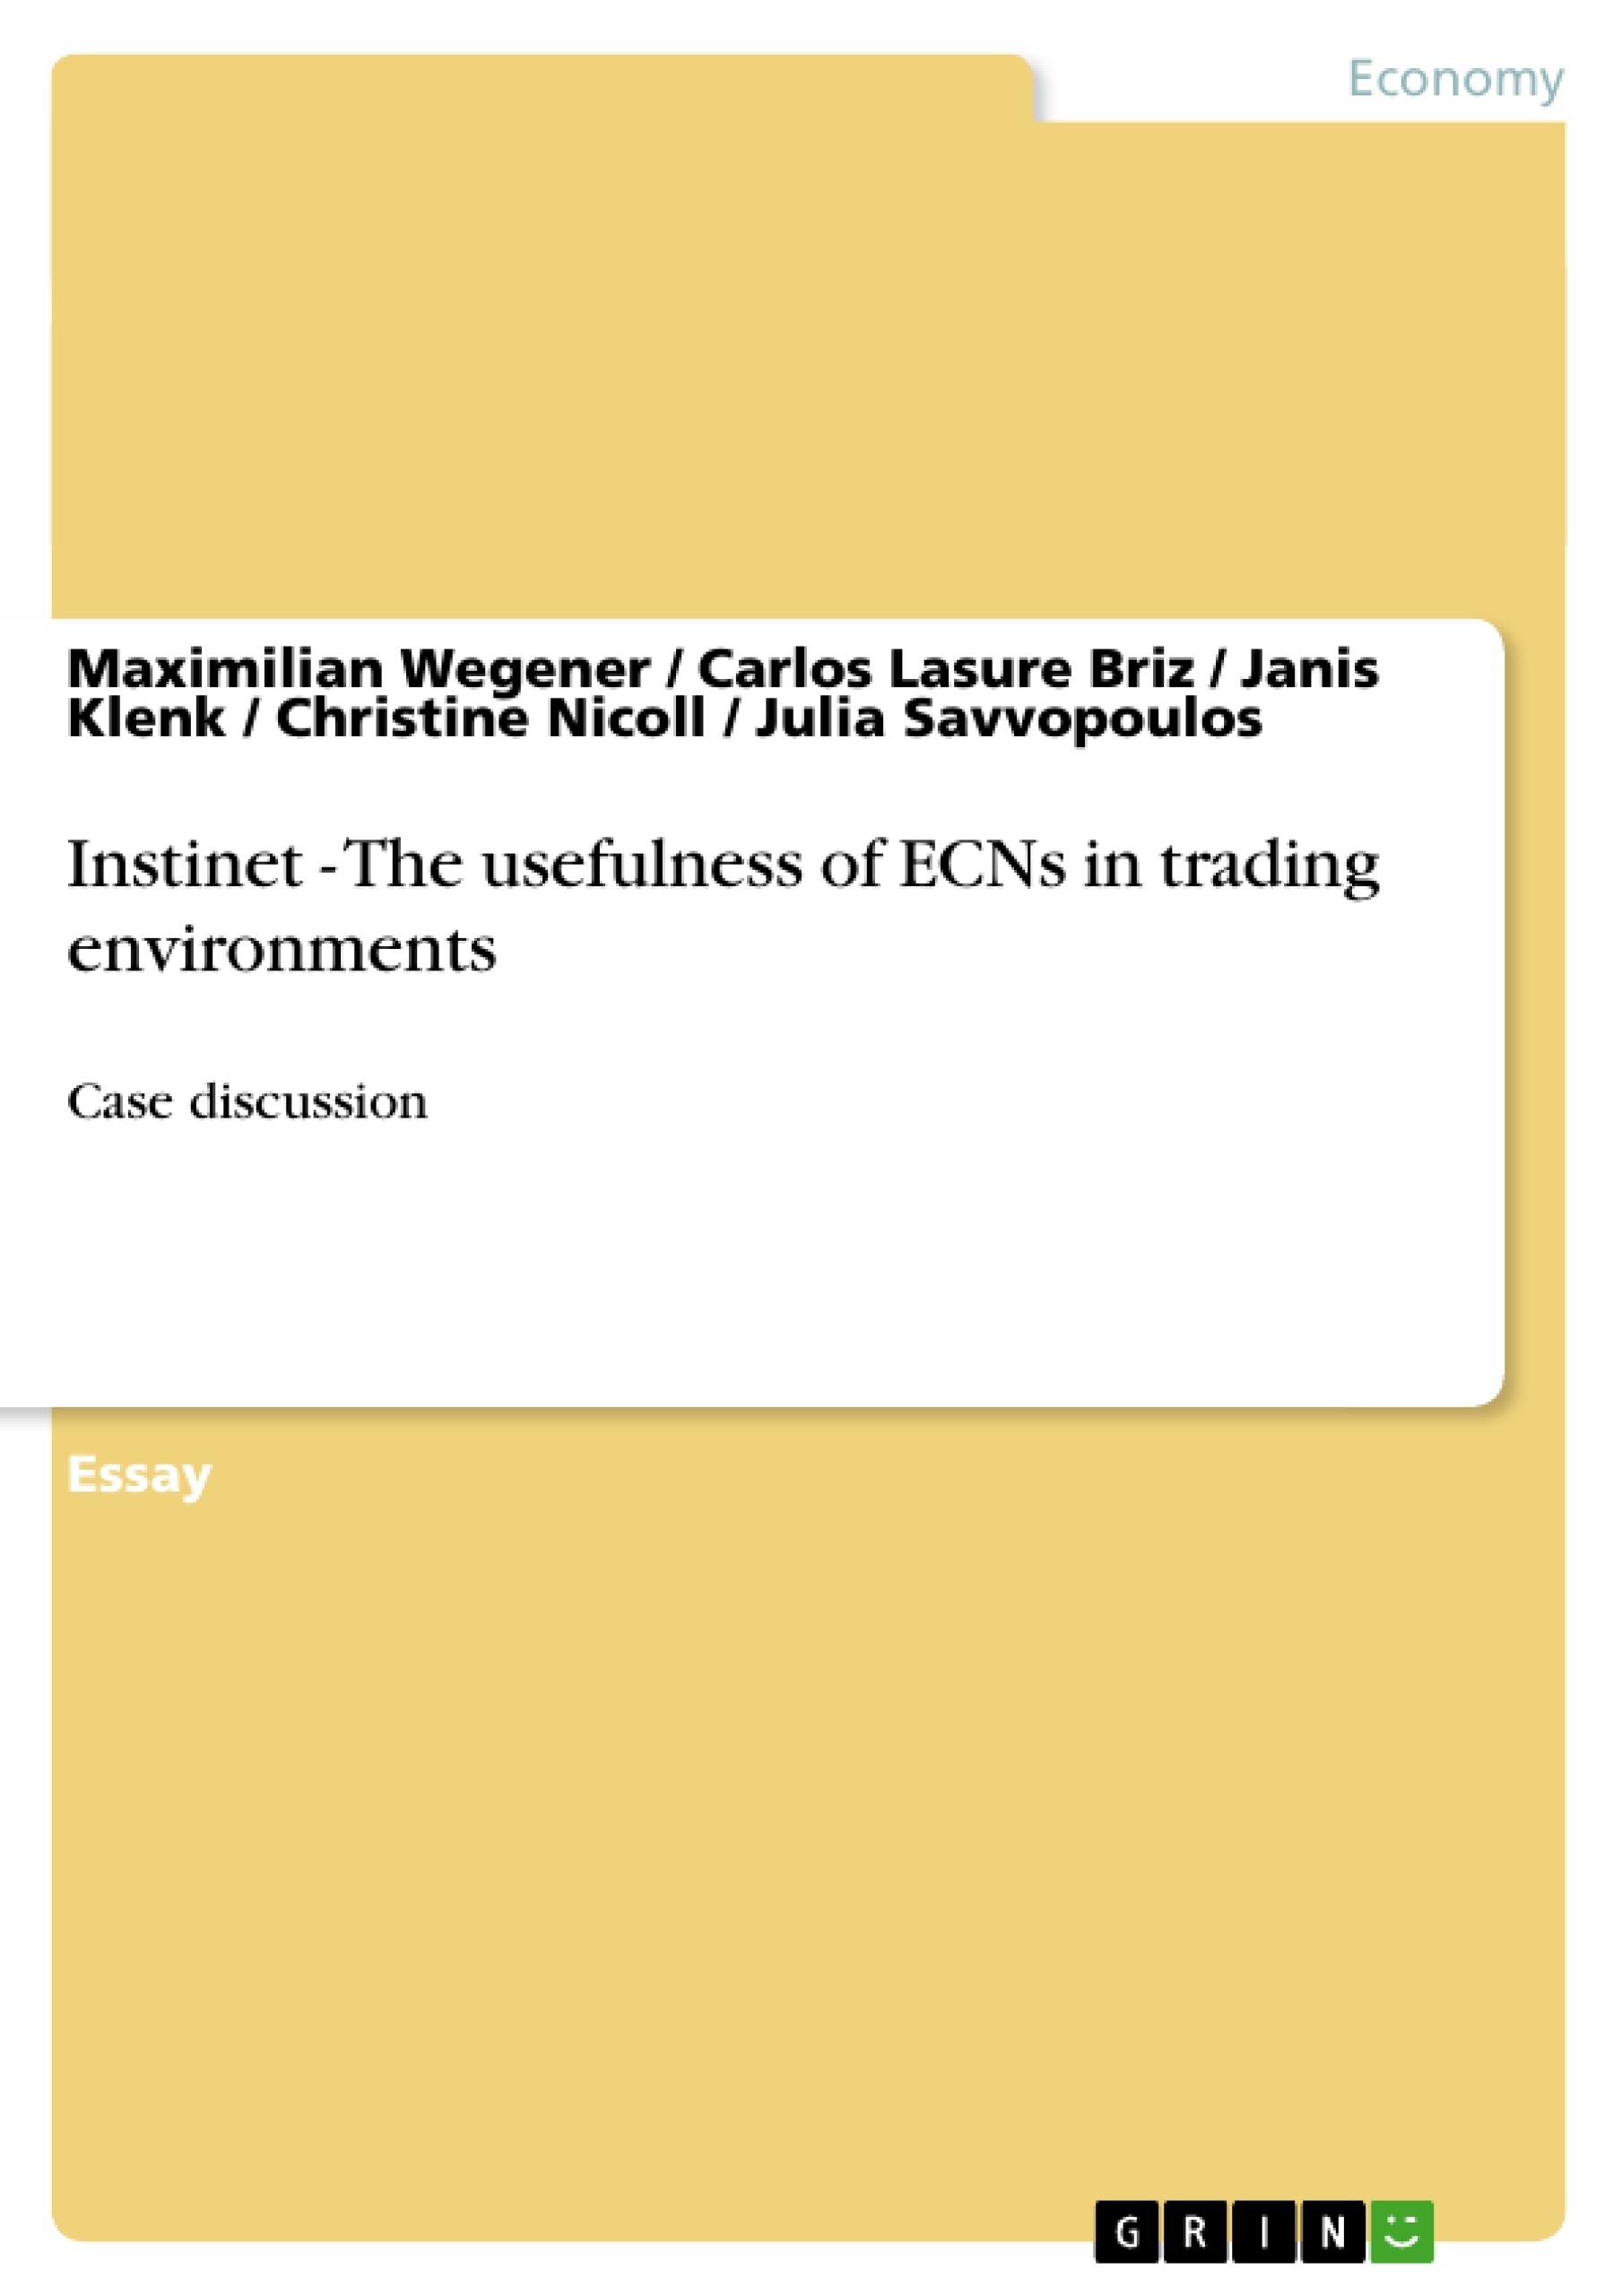 Título: Instinet - The usefulness of ECNs in trading environments